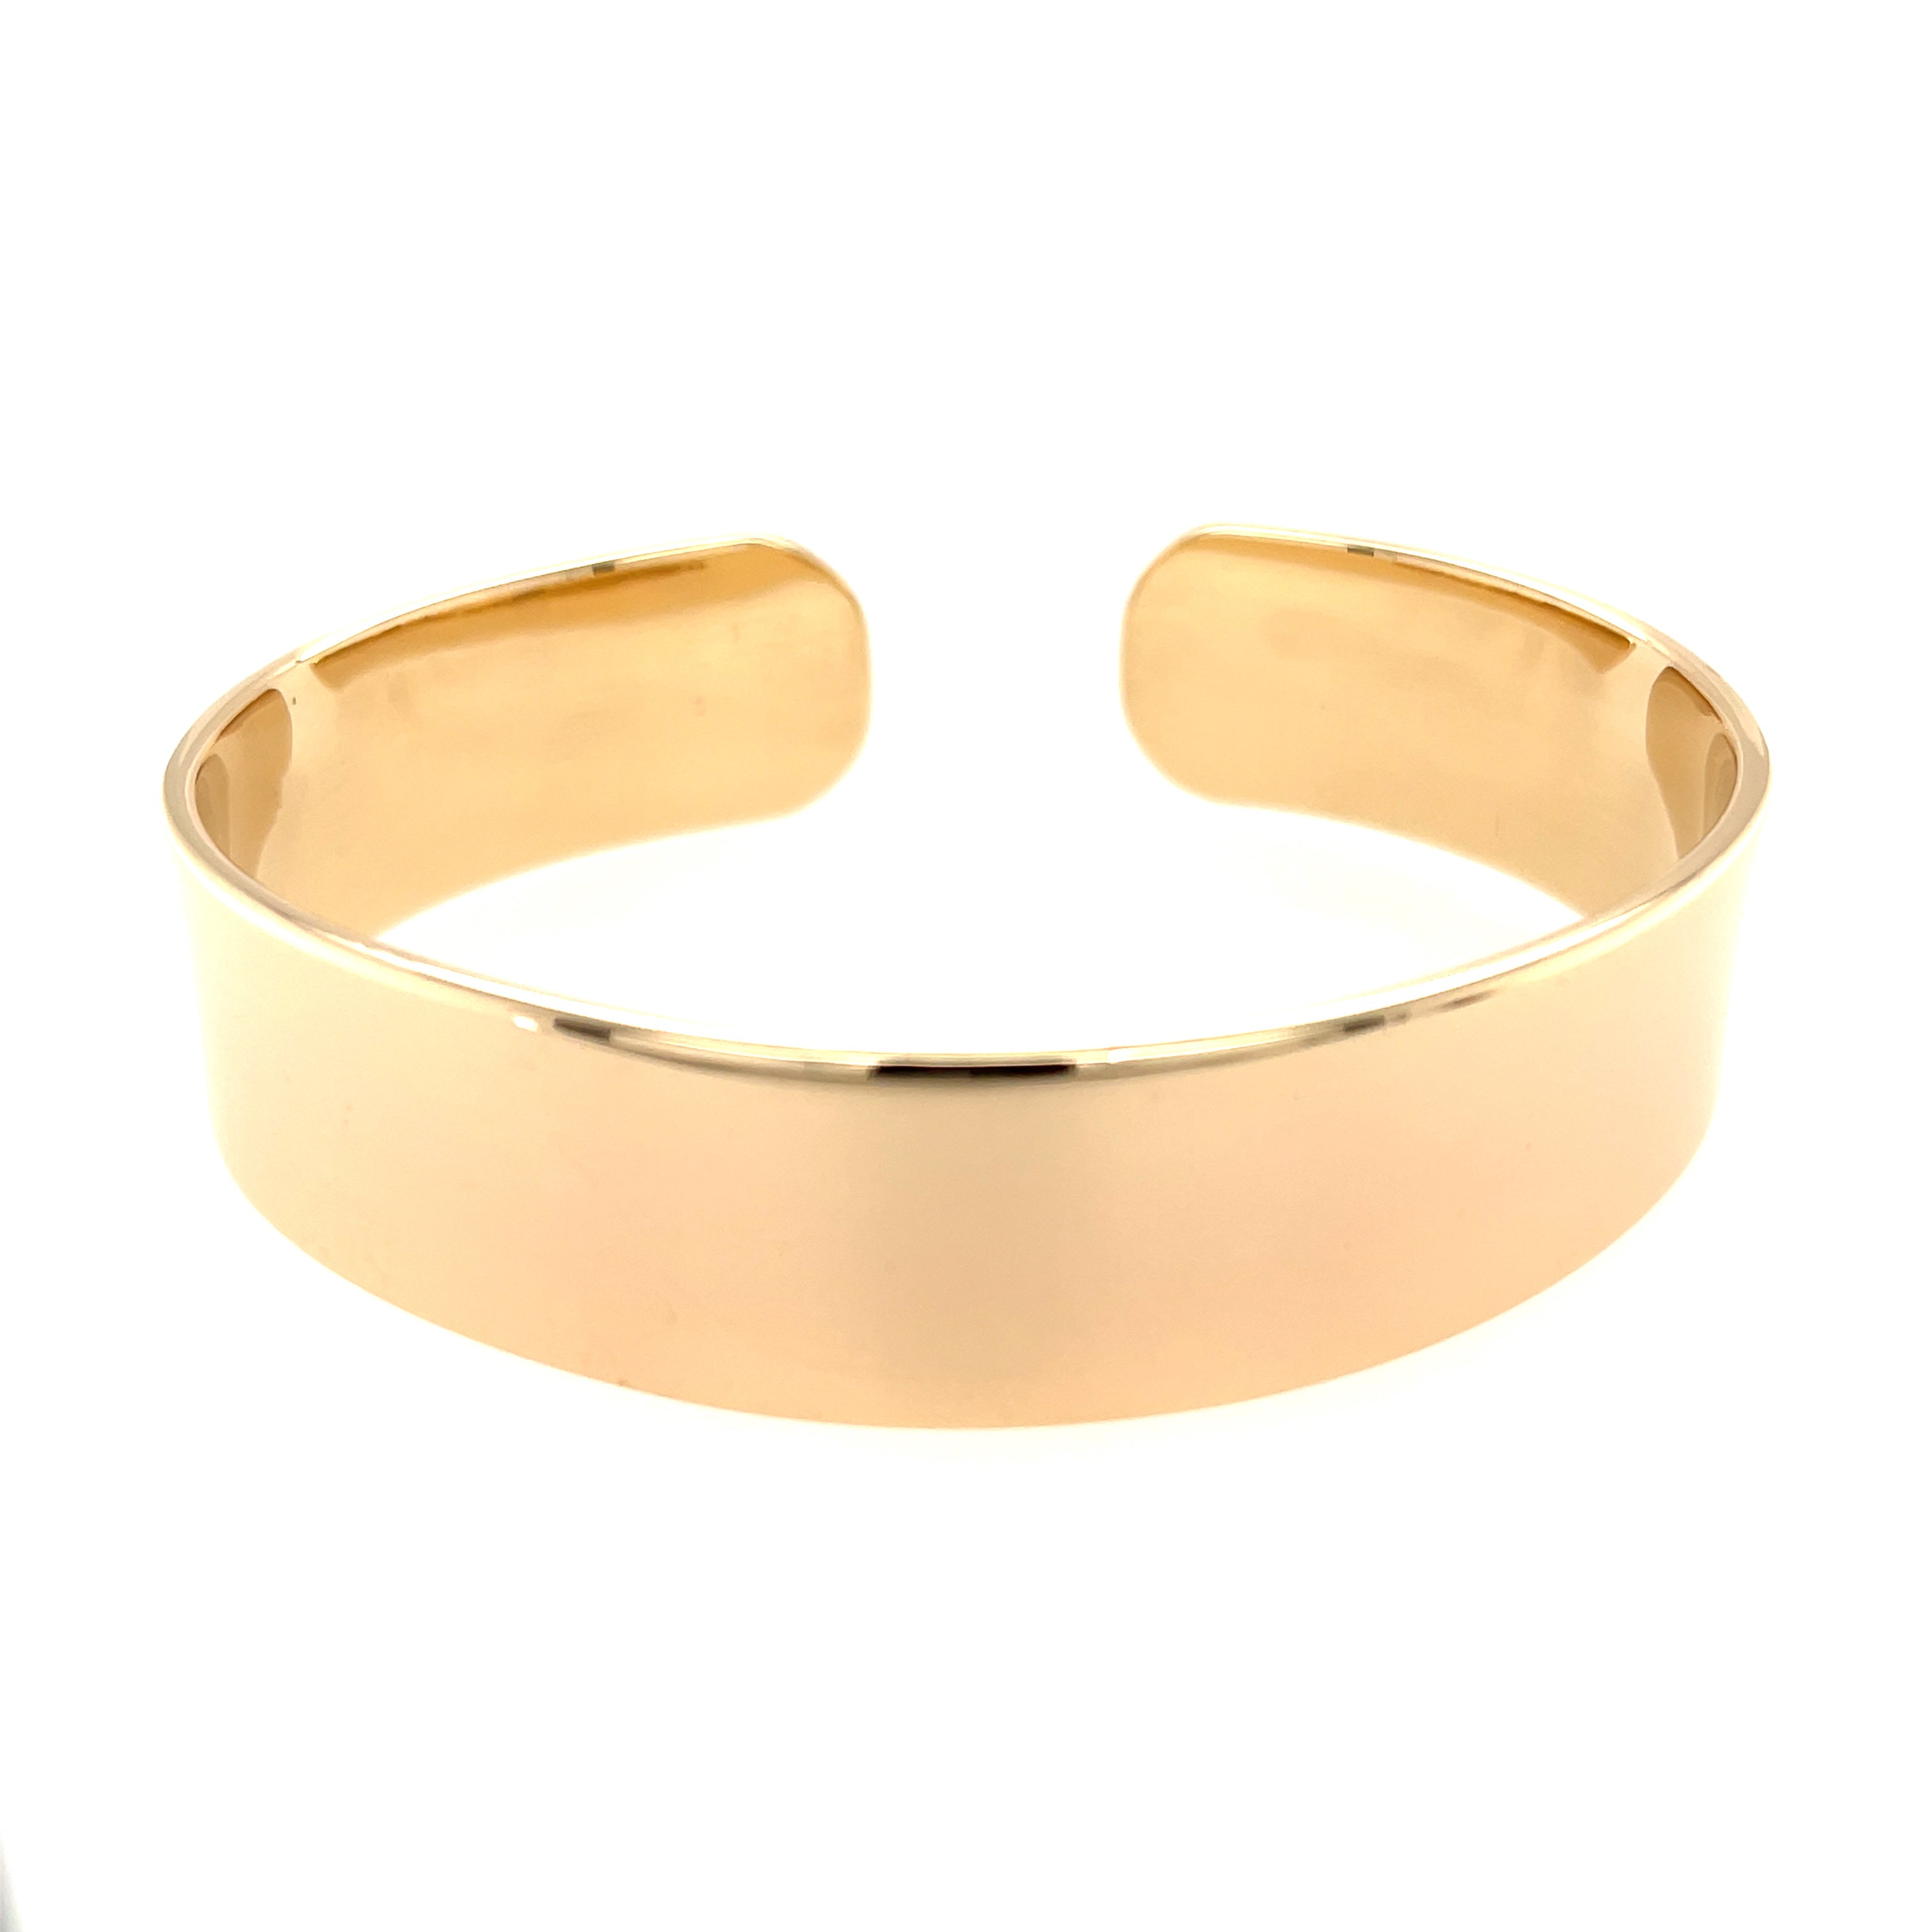 9ct Yellow Gold Heavy Flat Two Ounce Torque Bangle - 67.34g SOLD